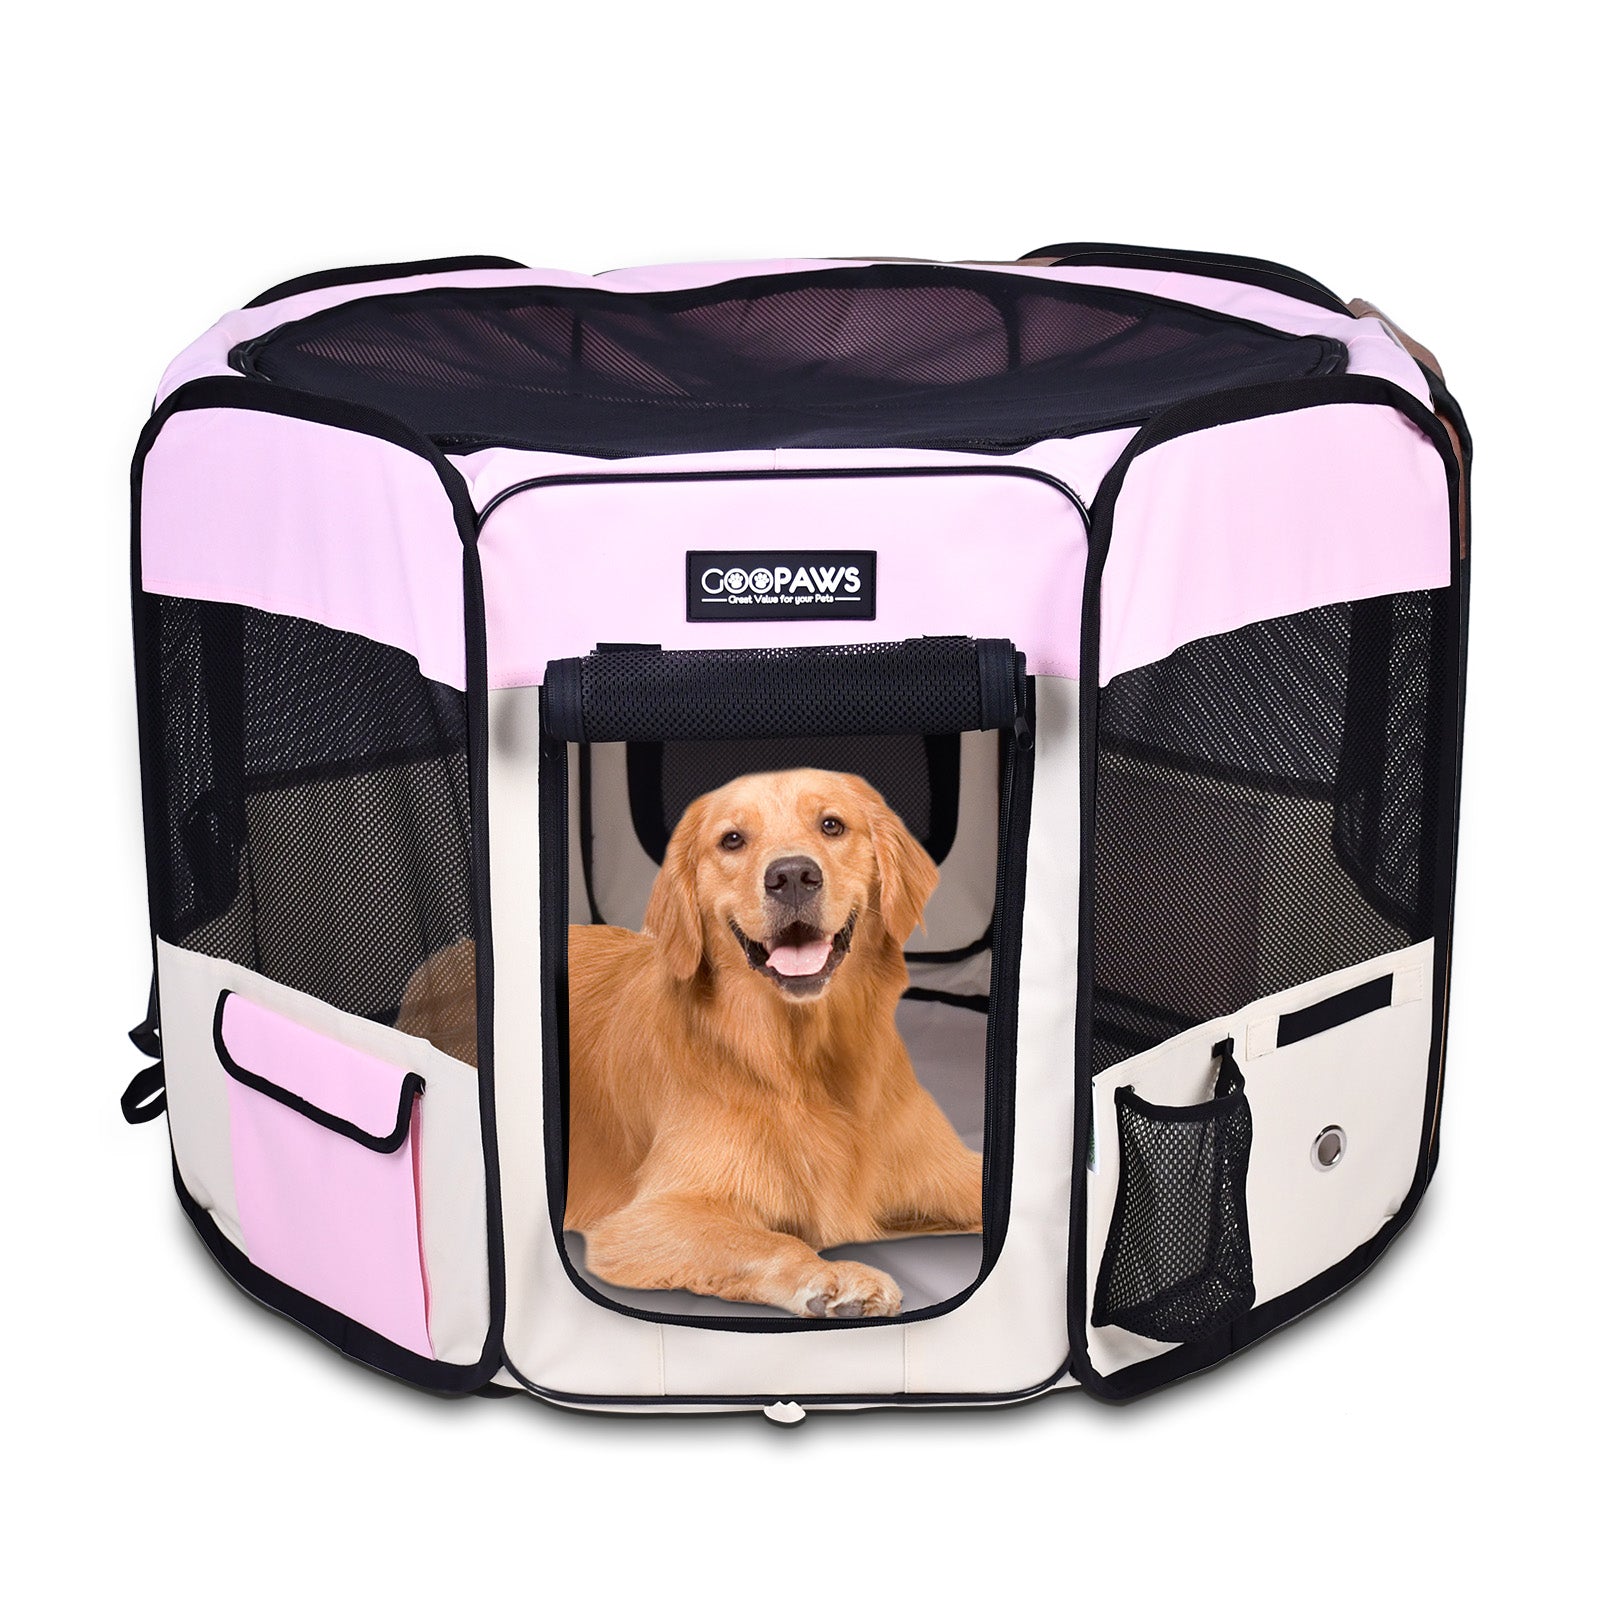 Jespet 2-Door Portable Soft-Sided Dog, Cat & Small Pet Exercise Playpen, Pink, 61''